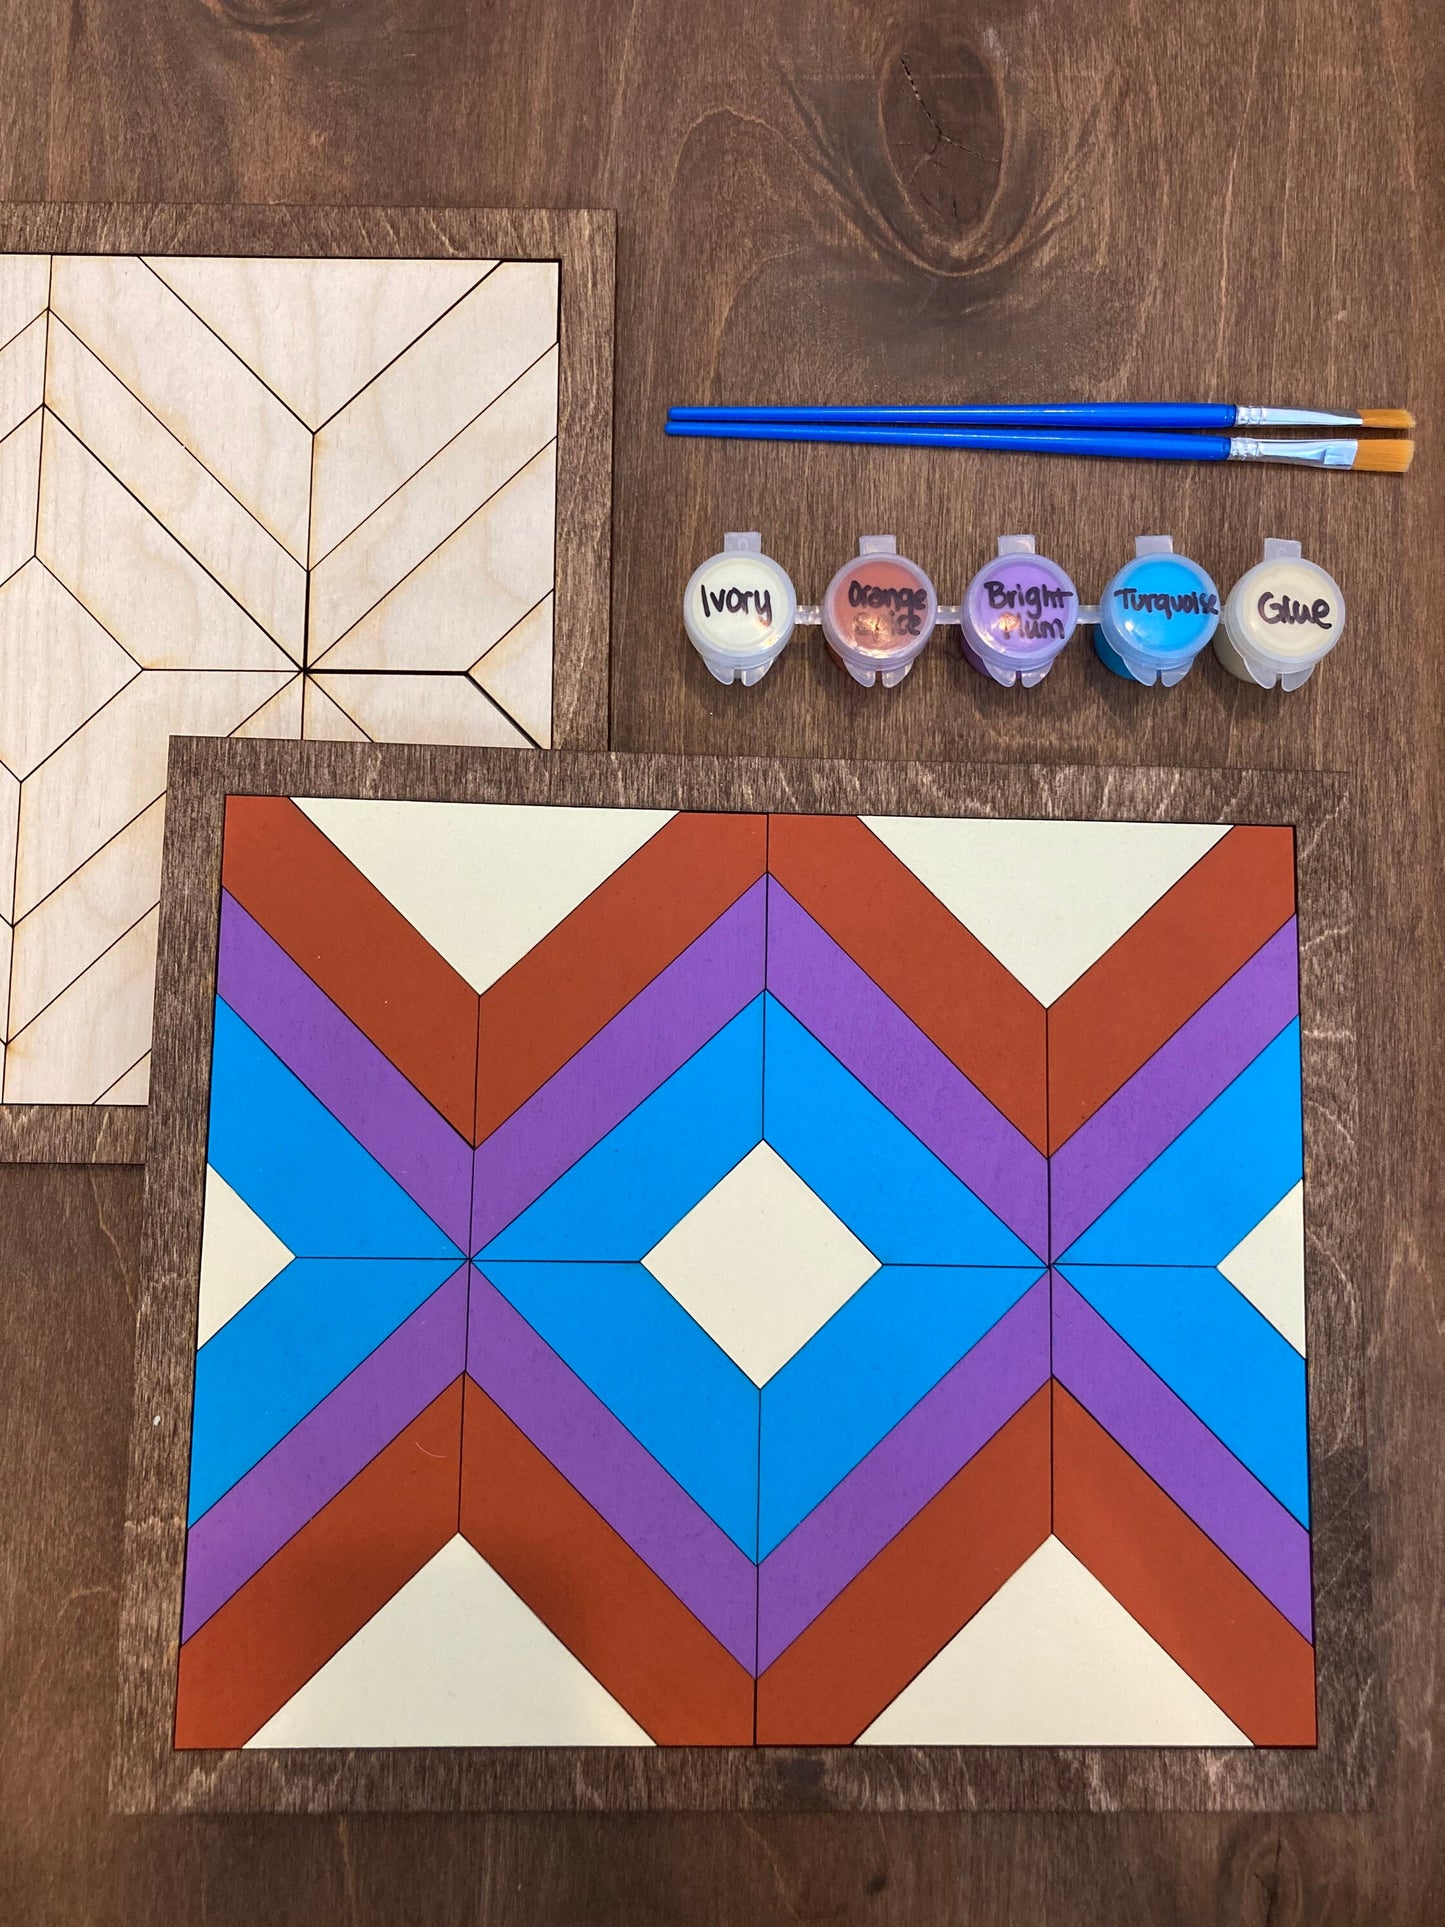 DIY Geometric Painting Kit, DIY Craft Kit, Barn Quilt Painting, DIY Mosaic Painting, Gift for Her, Craft for Adults, Gift for Him